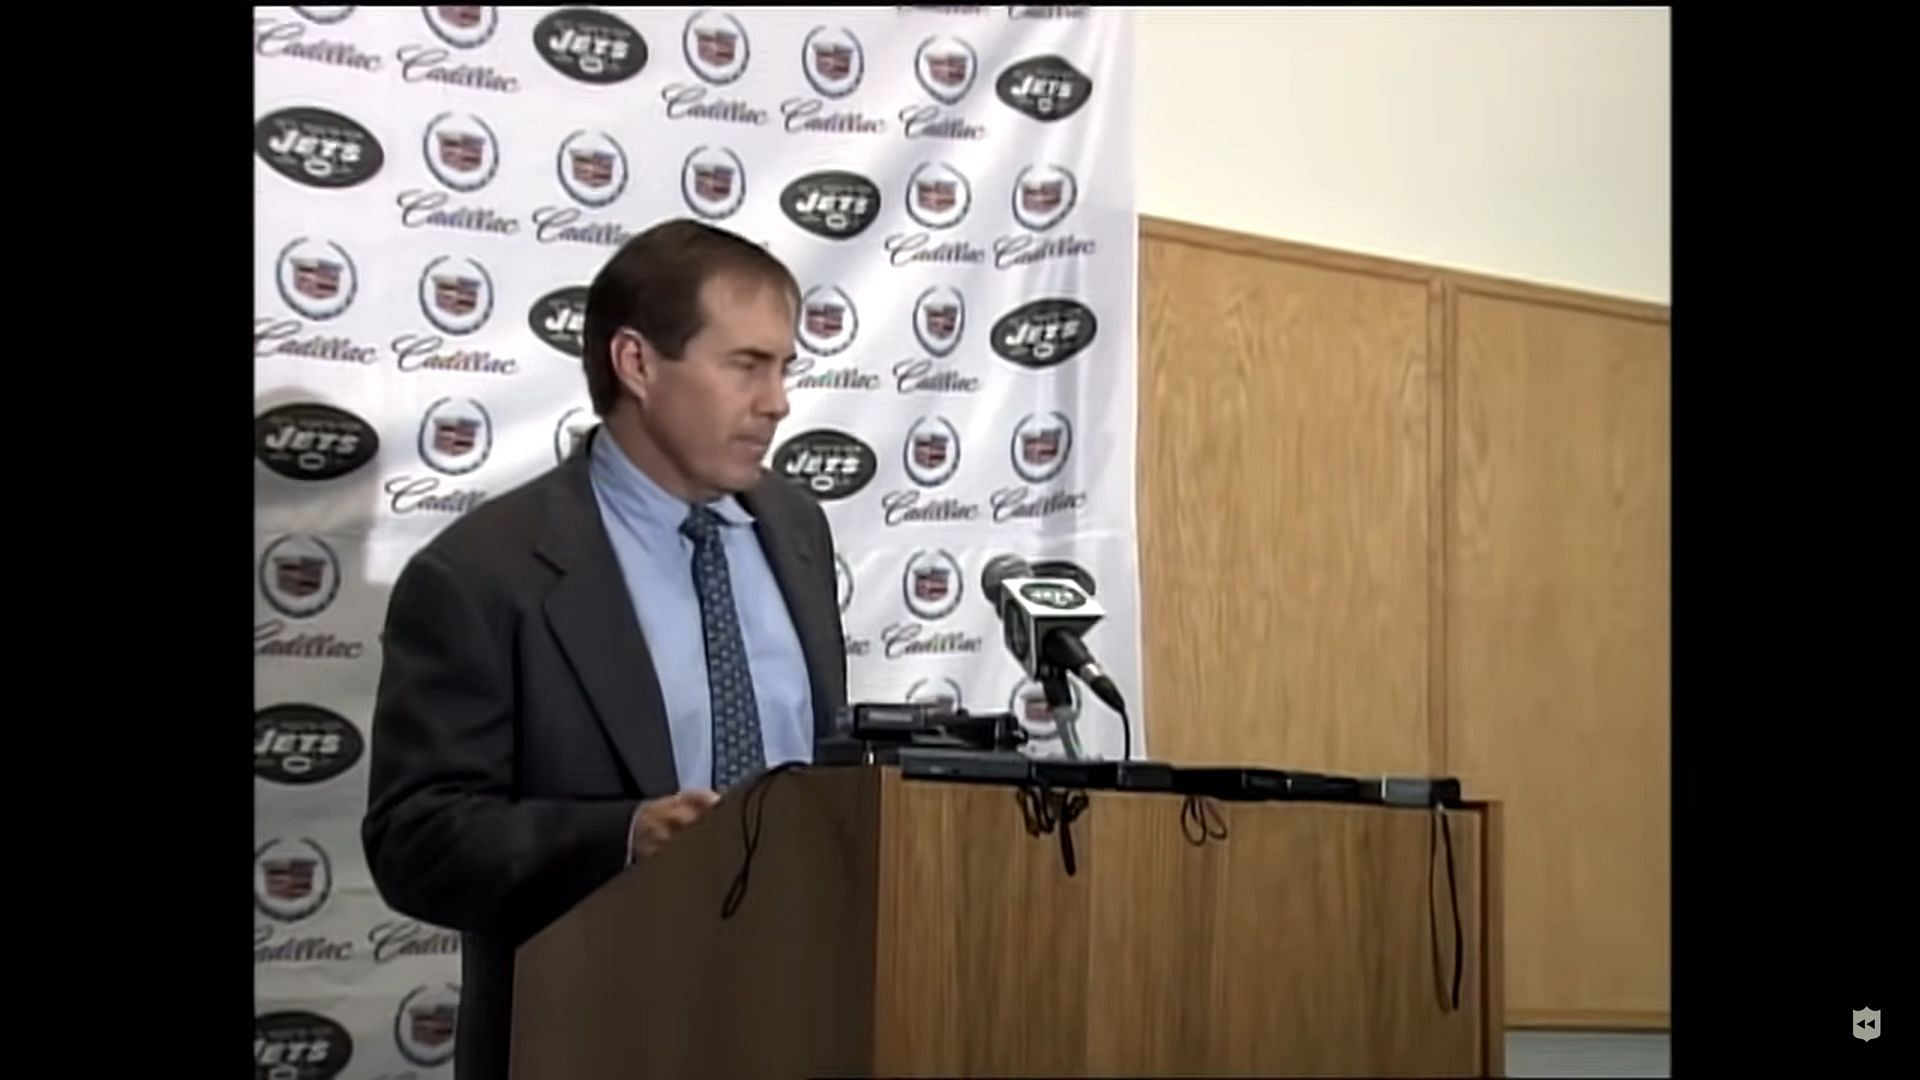 Belichick announcing his resignation from the Jets after just one day.